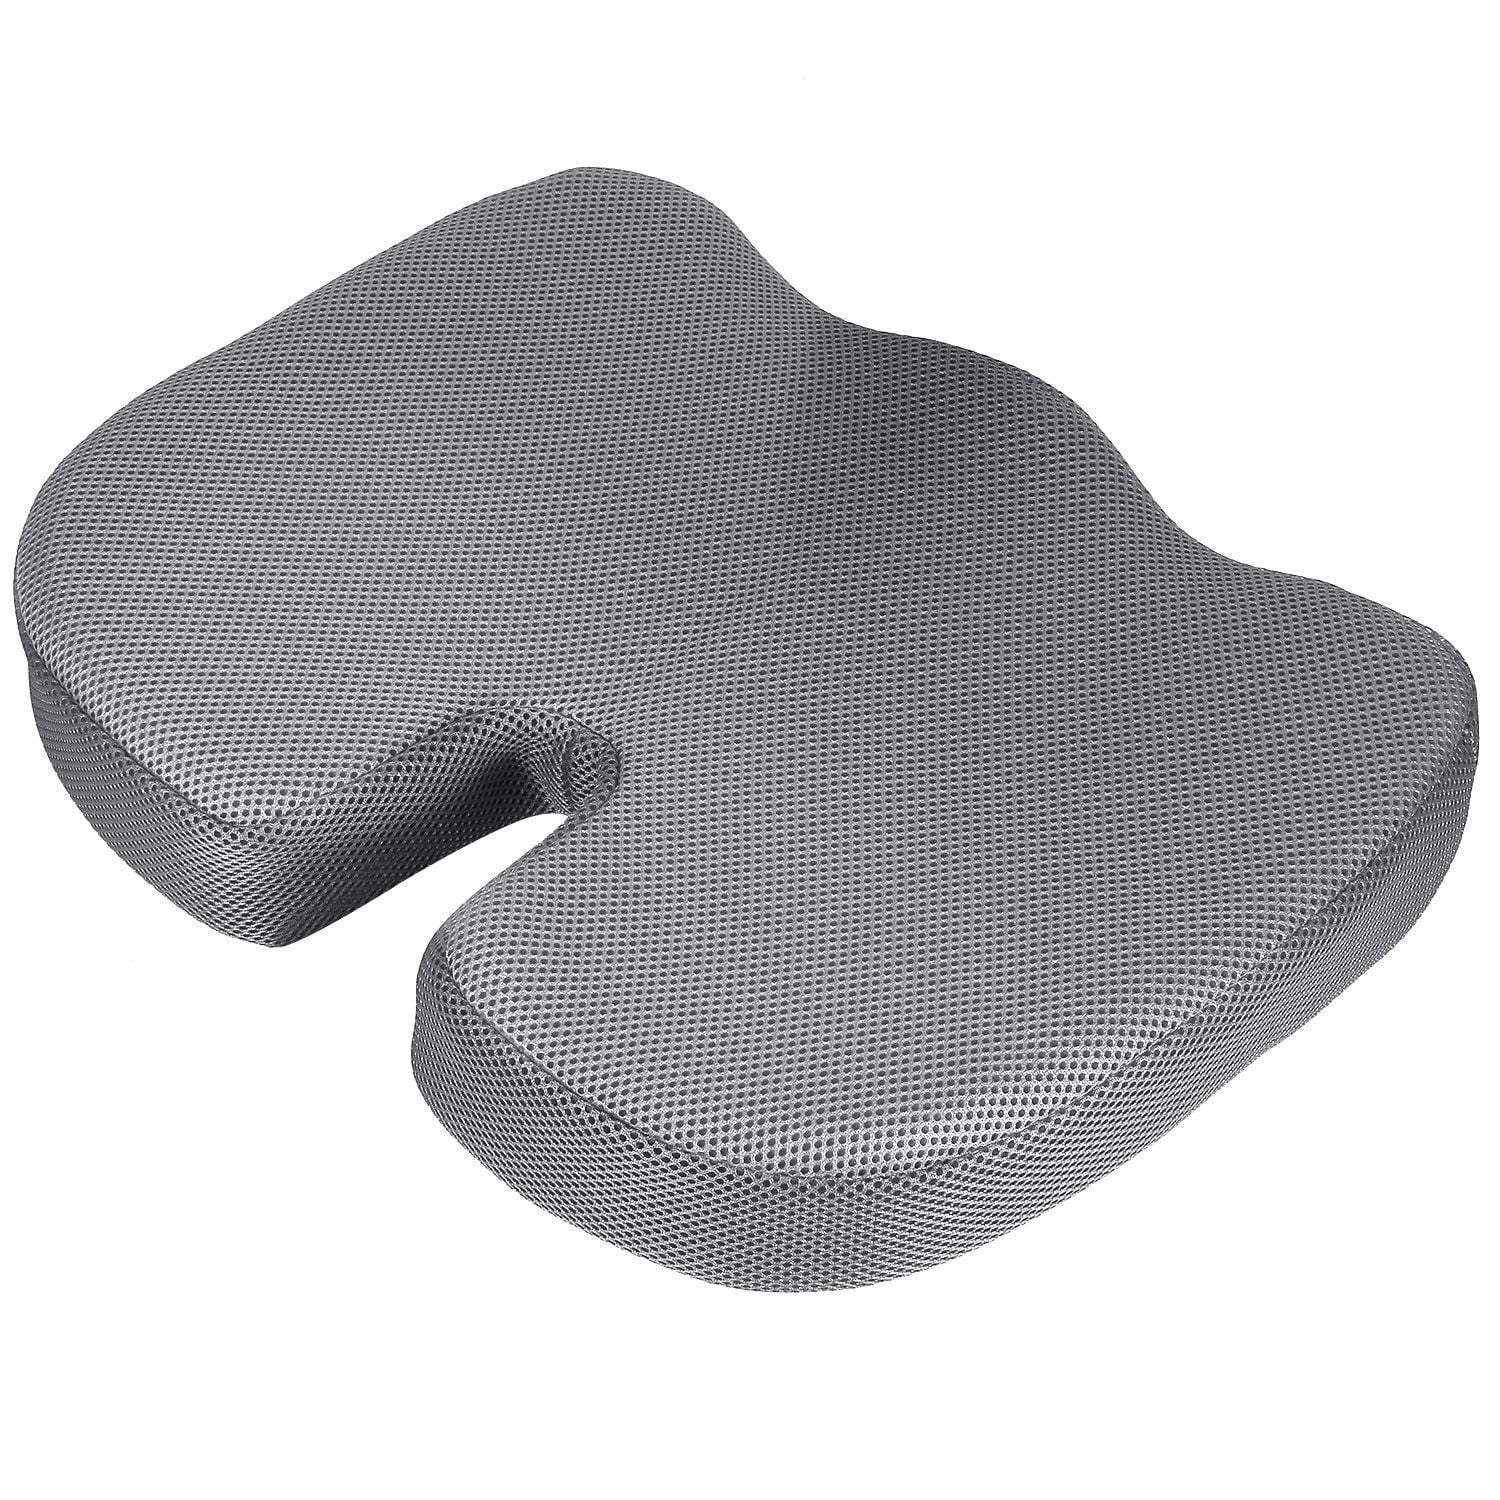 BIG SALES! Seat Cushion for Office Chair Memory Foam Orthopedic Coccyx  Pillow for Back Pain & Sciatica Relief Tailbone Pain for Car Computer Chair